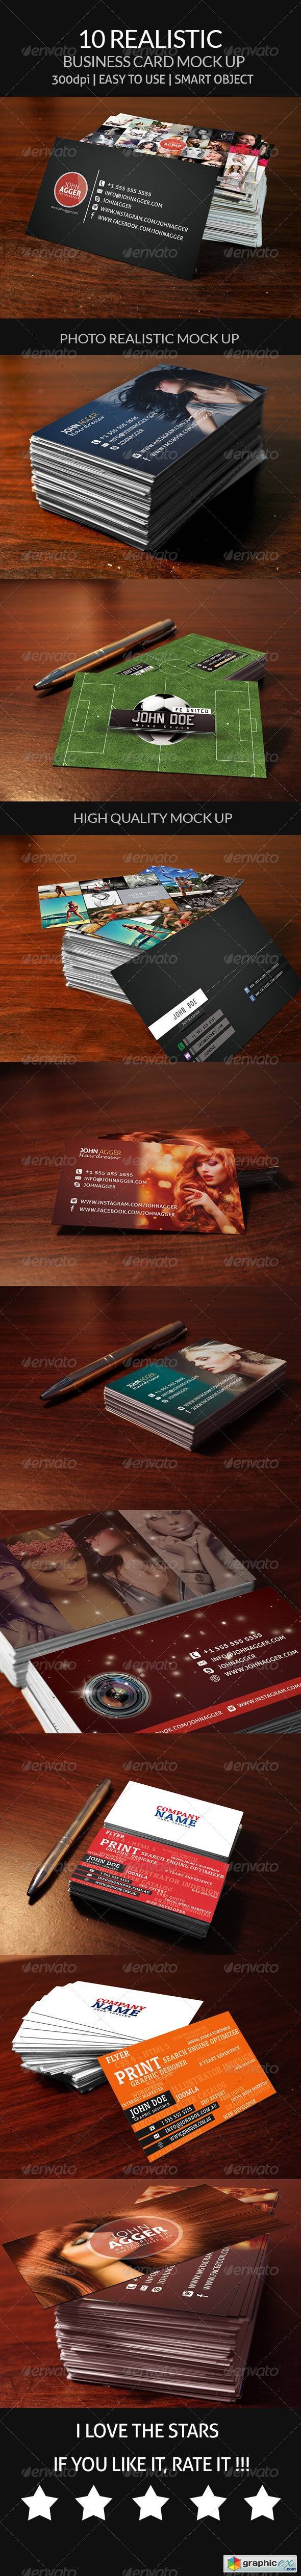 10 Realistic Business Card Mock Up